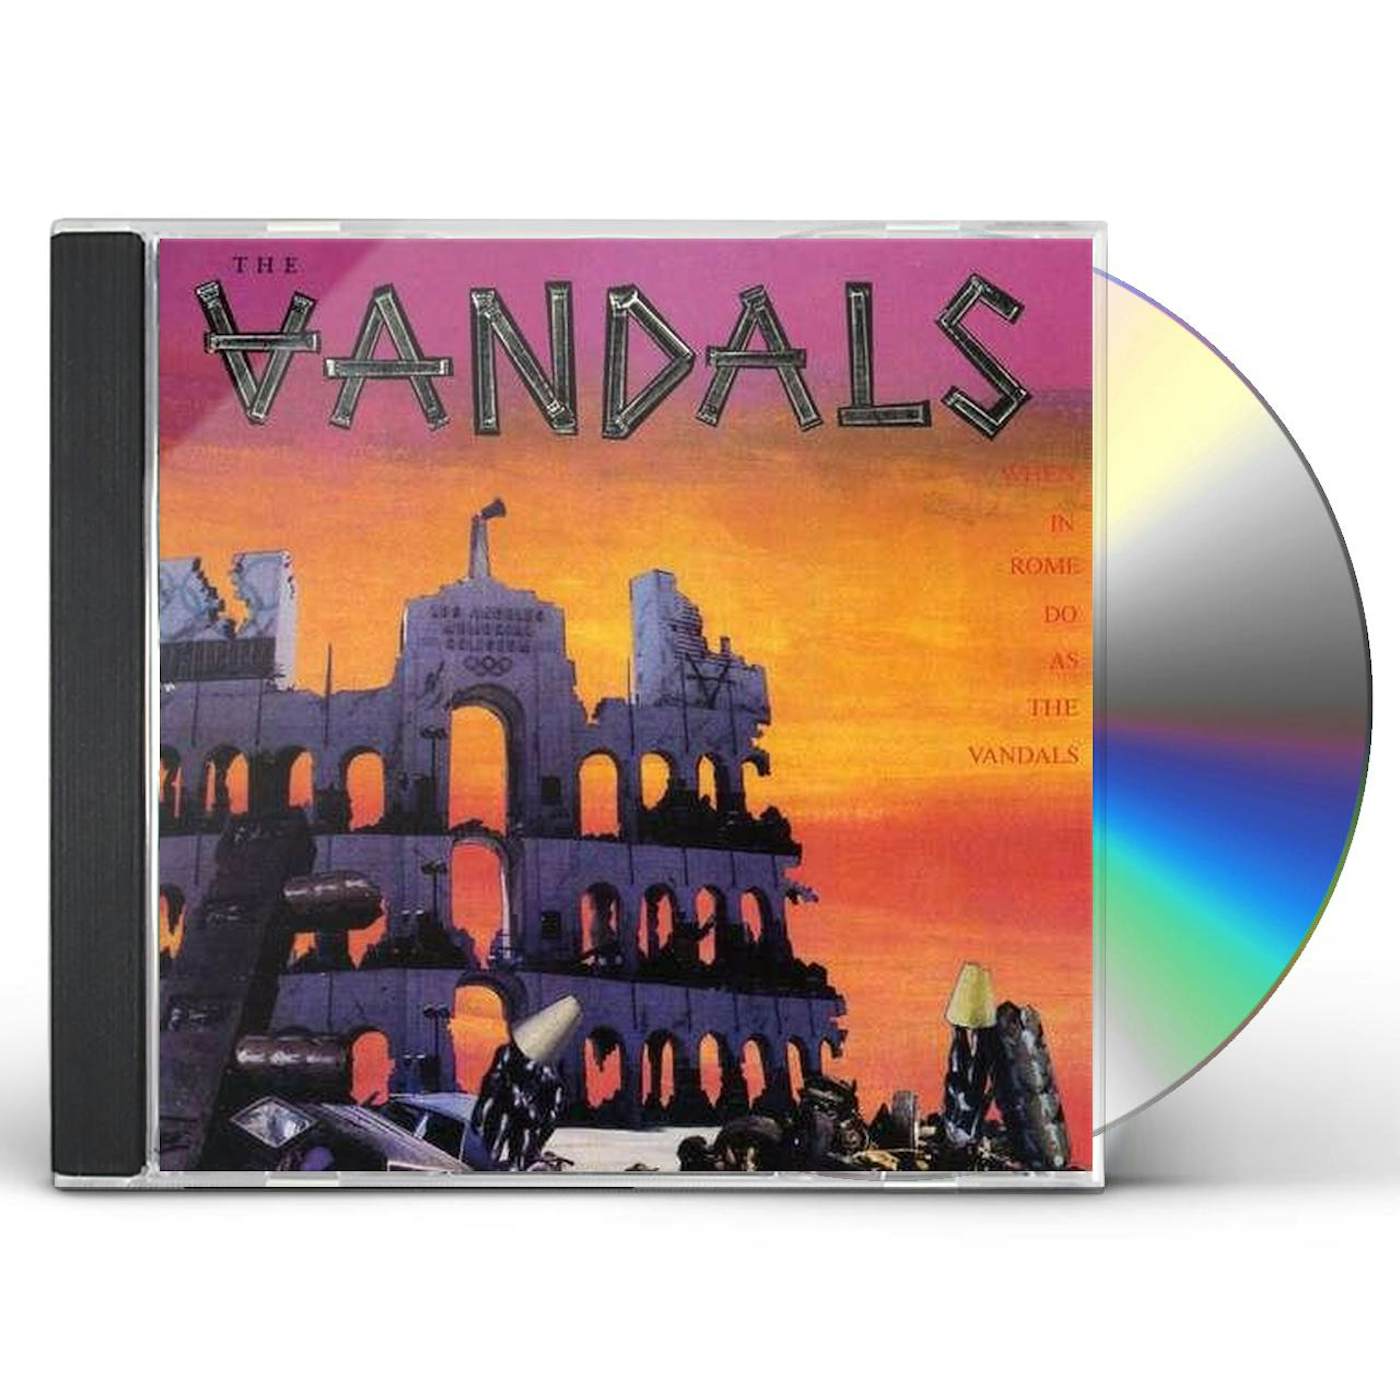 WHEN IN ROME DO AS THE VANDALS CD